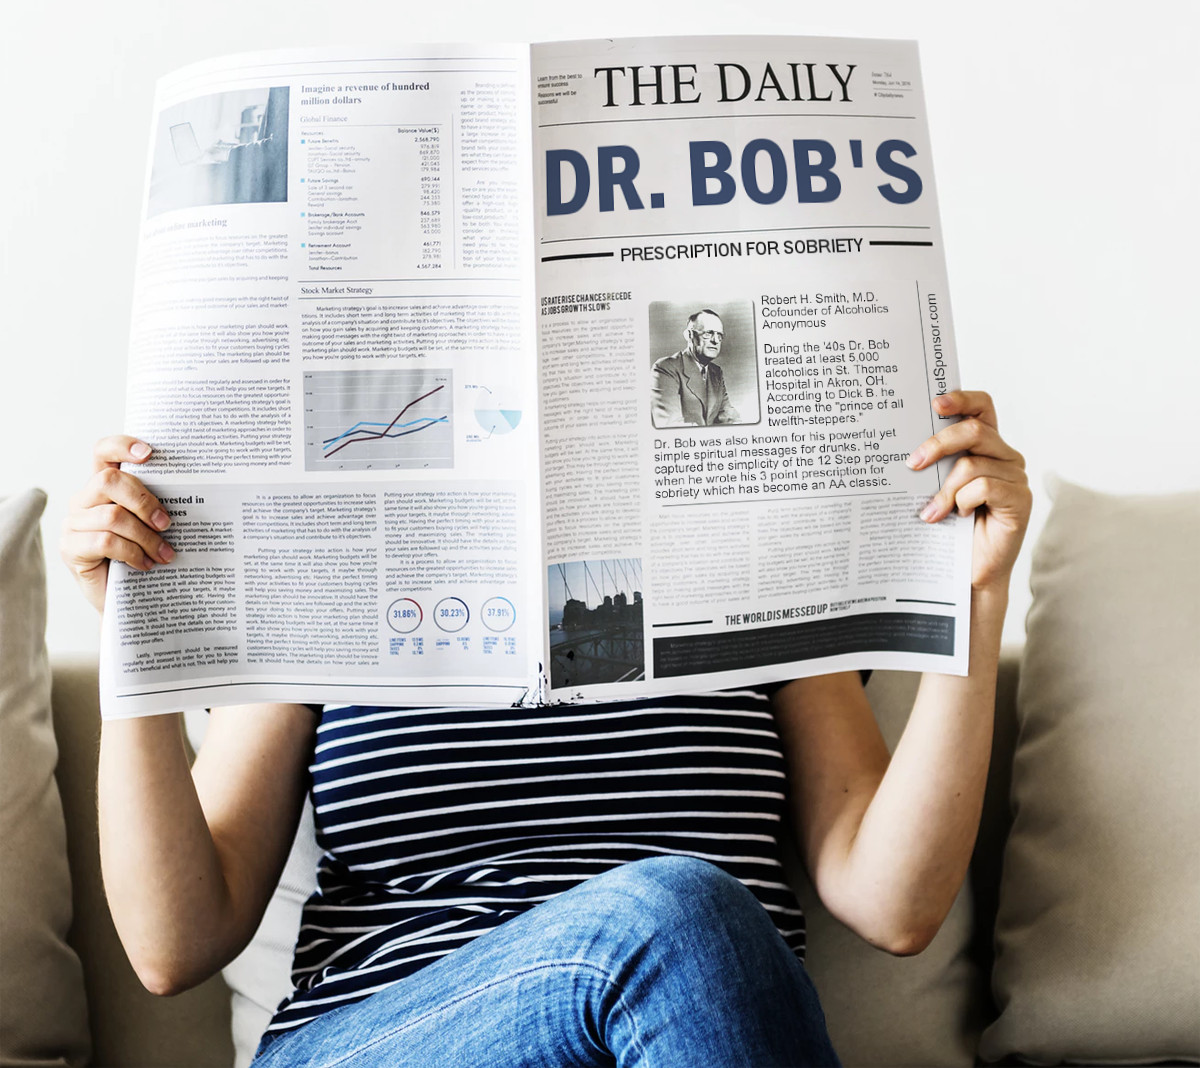 REad all about Dr. Bob's prescription for sobriety